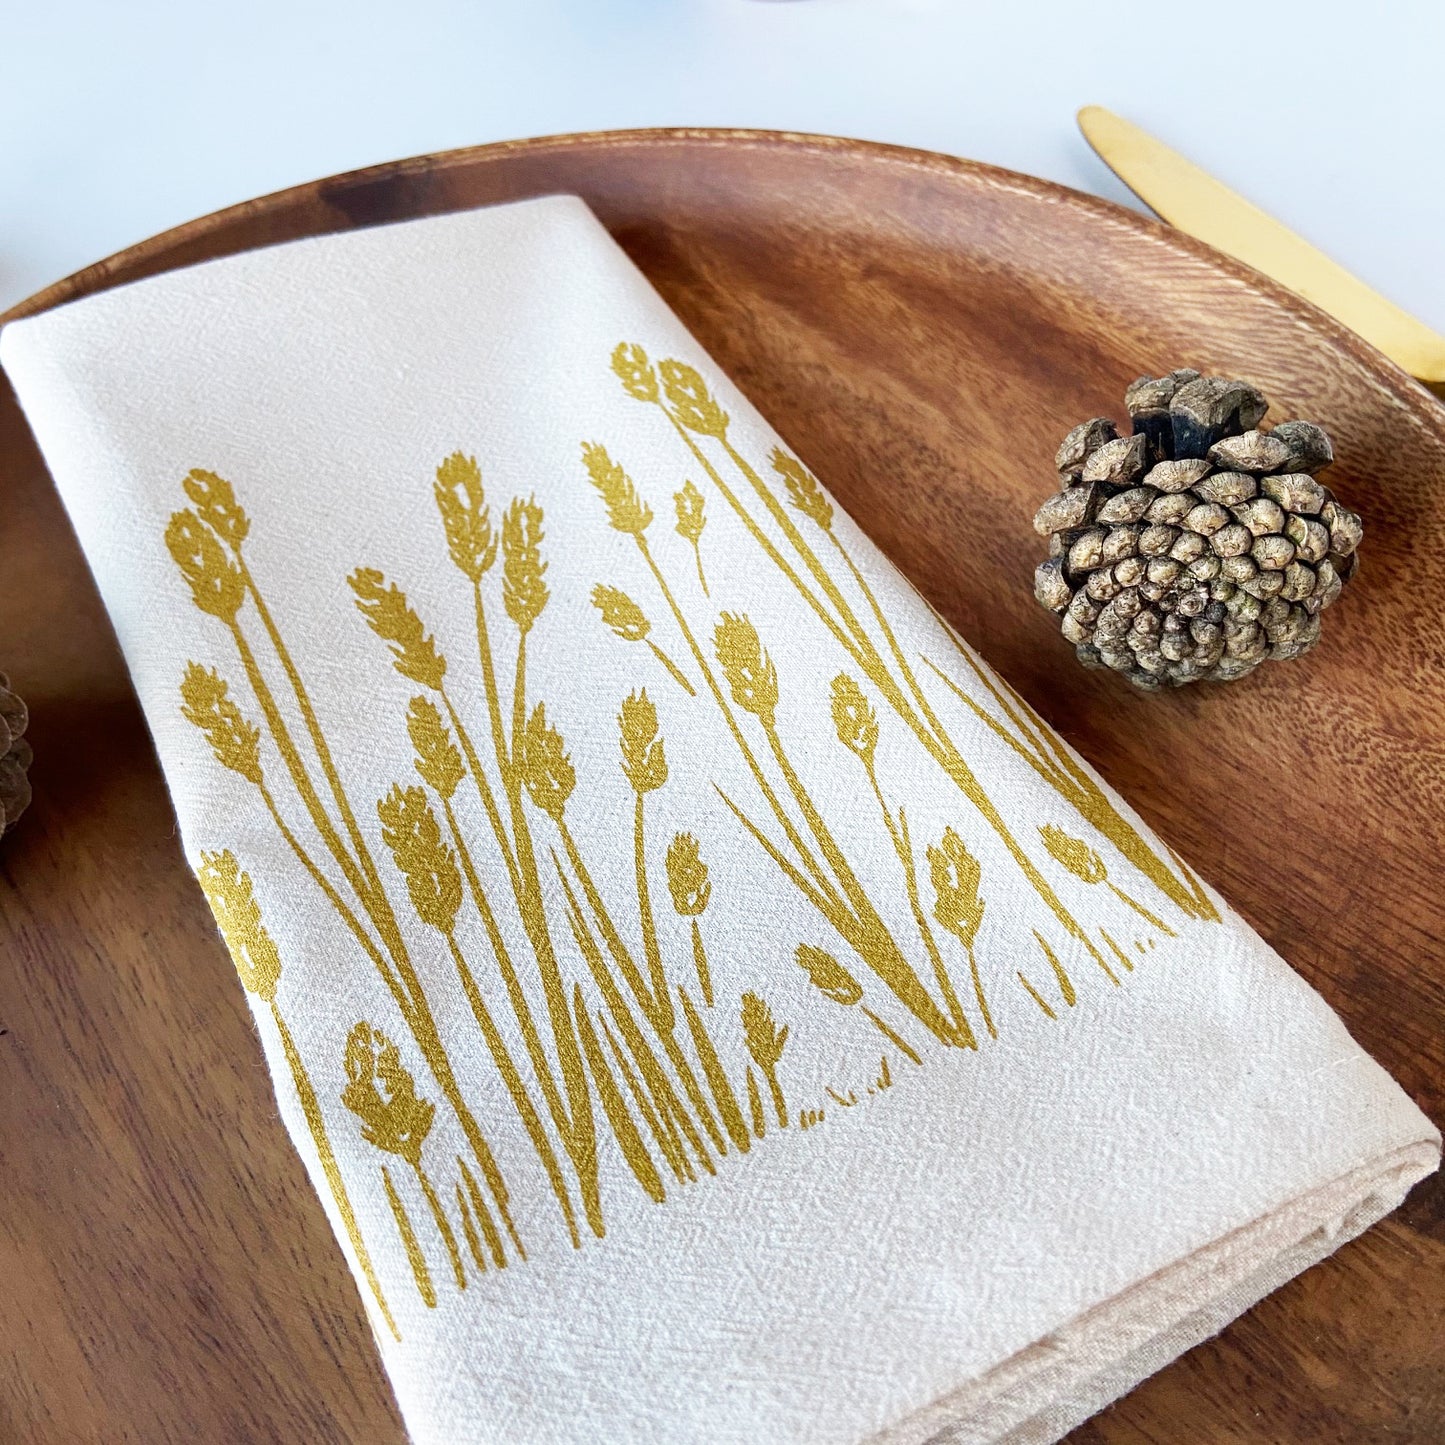 Organic Golden Wheat Hand Printed Napkins Set of 4 or 8